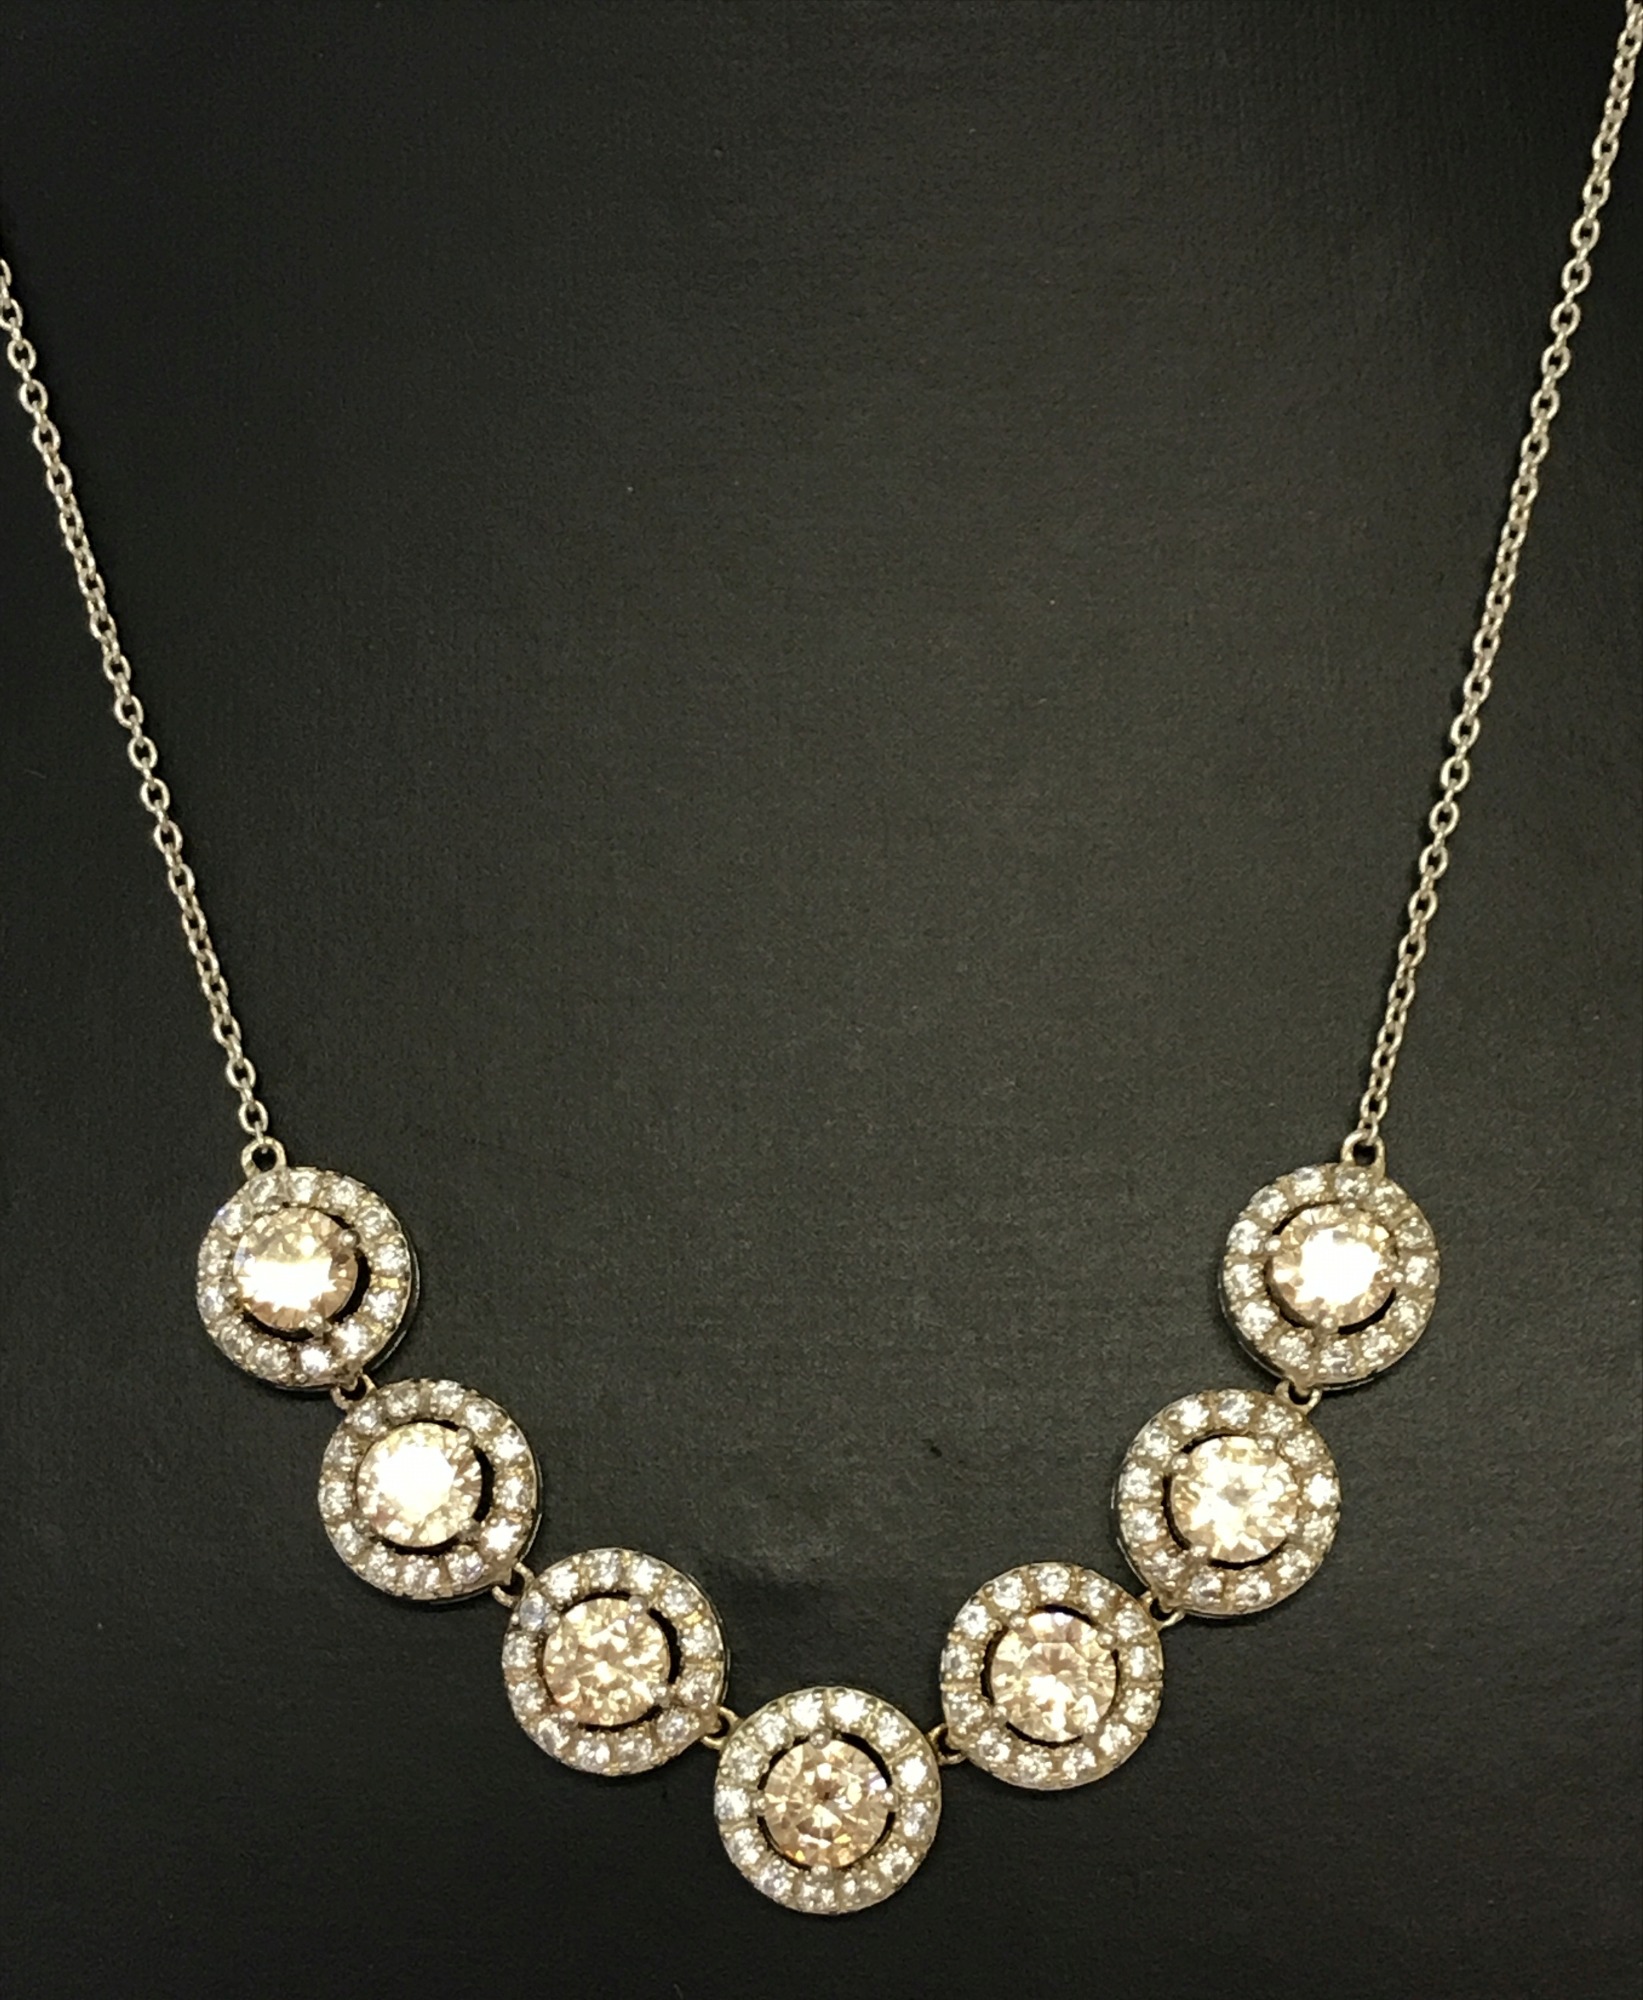 A decorative clear and champagne stone set dress necklace.